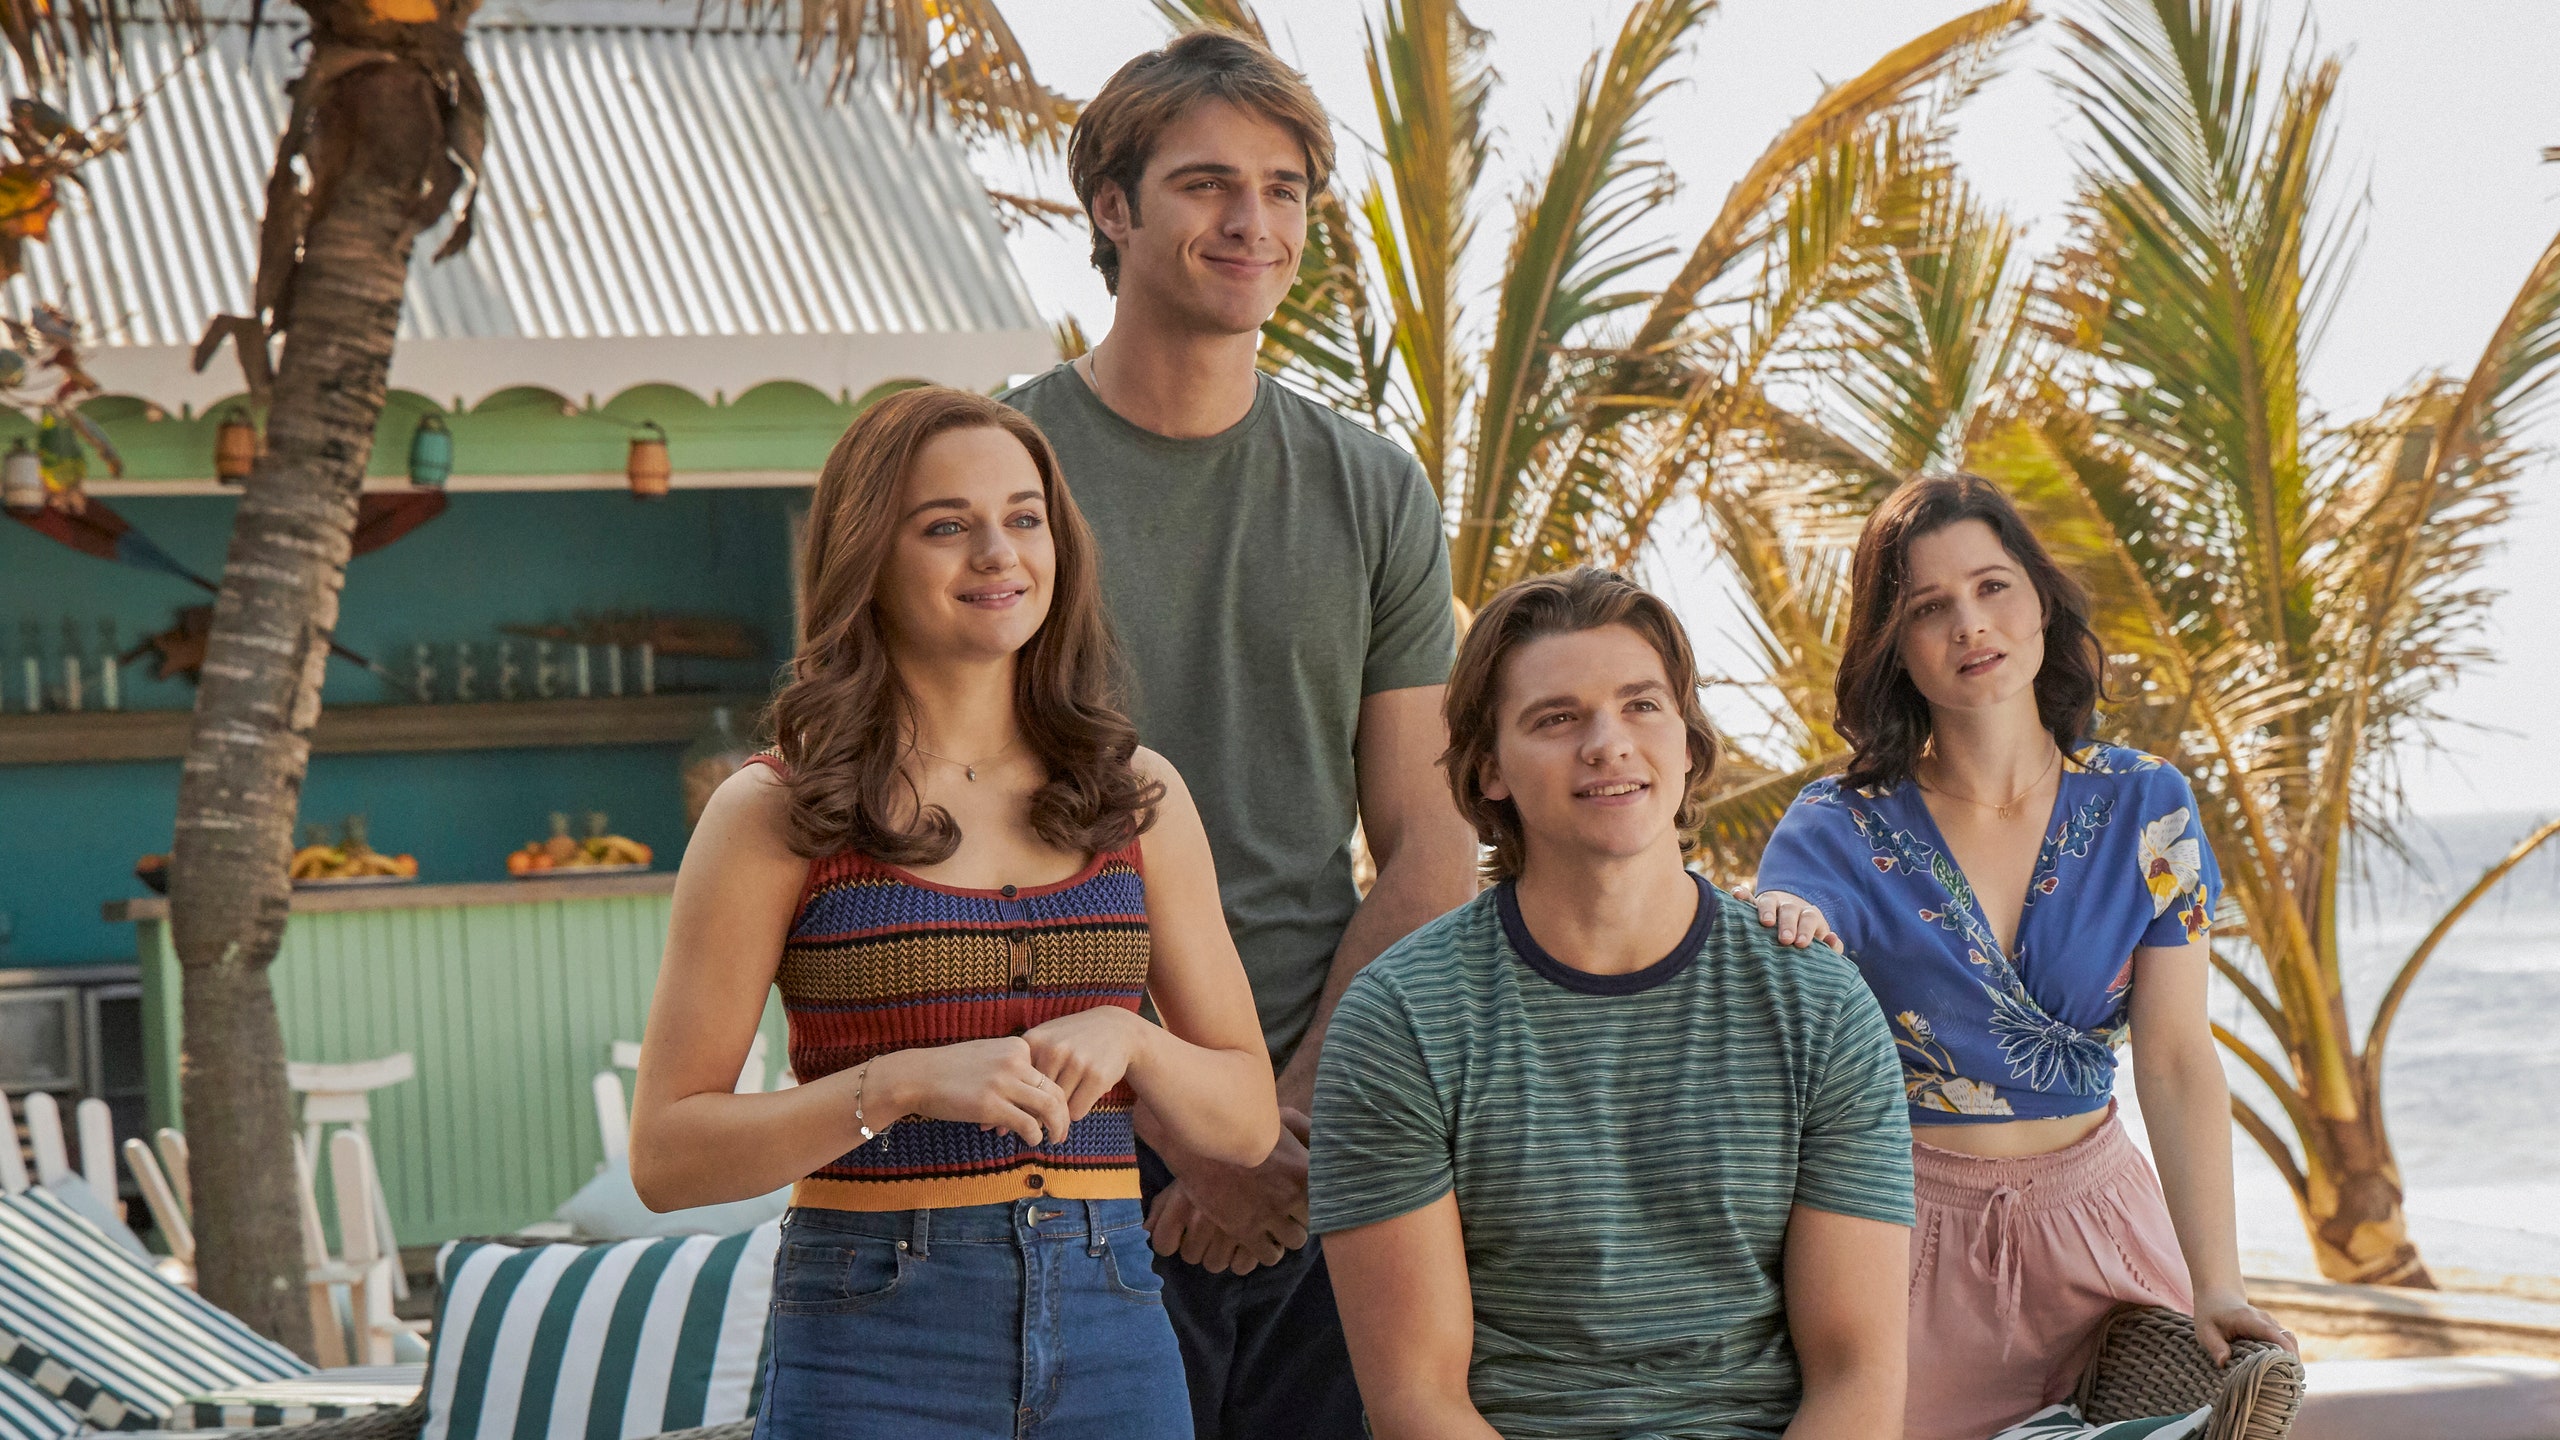 Netflix’s The Kissing Booth 3 Trailer Has Joey King Back in Romantic Shenanigans